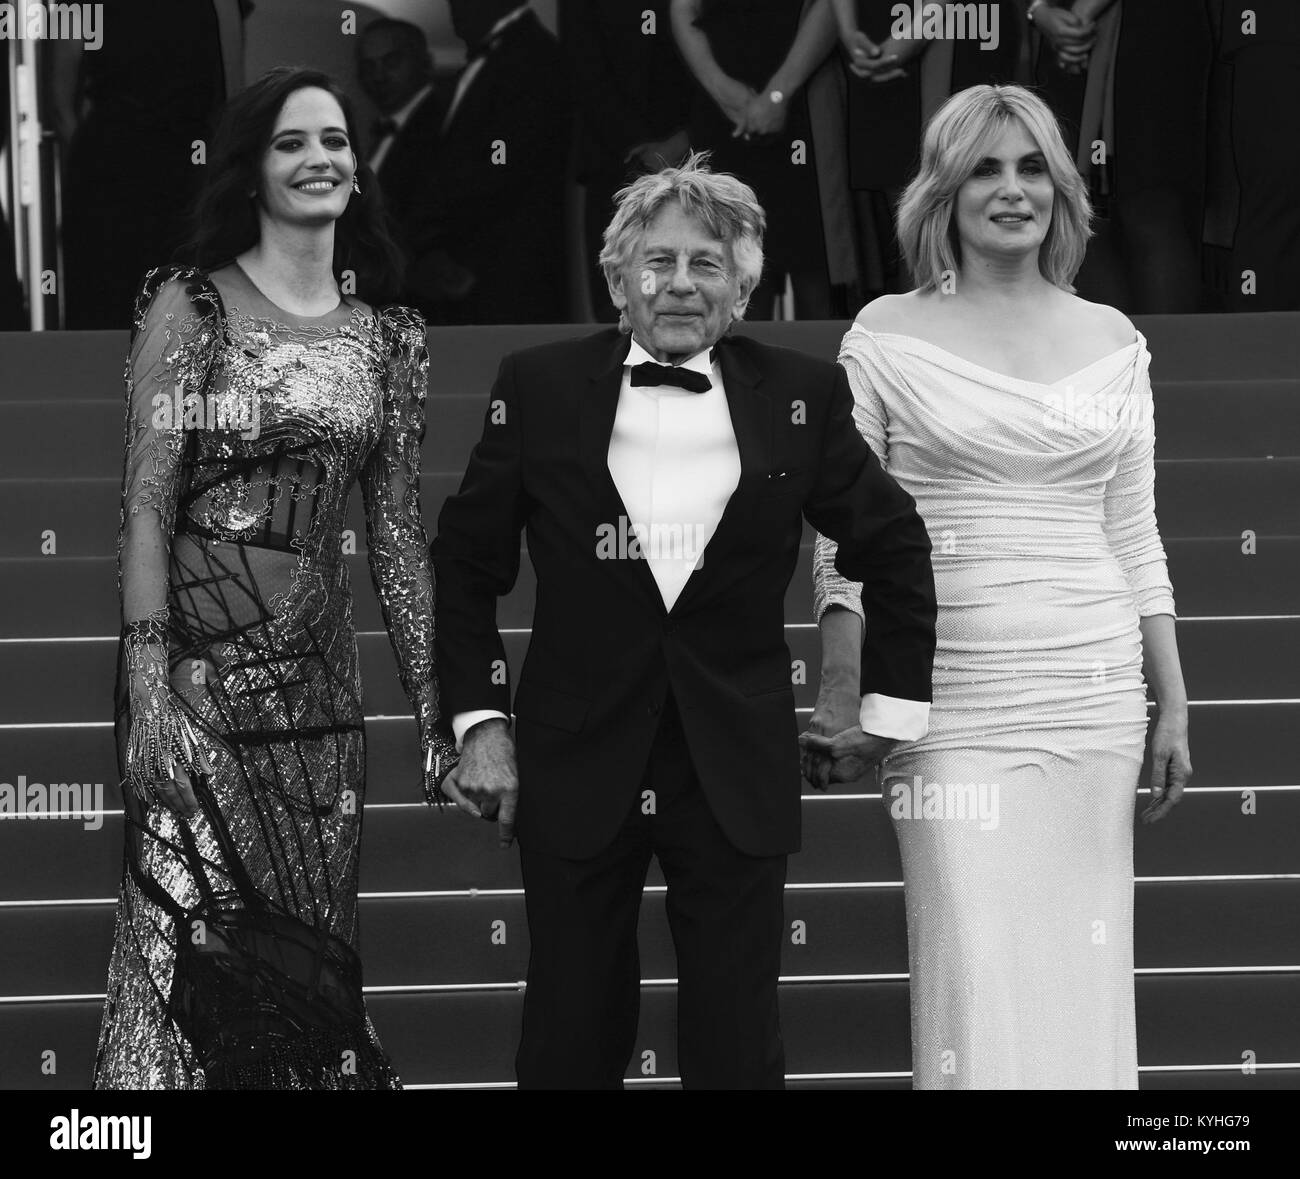 CANNES - MAY 27, 2017: ( Image digitally altered to monochrome )  Eva Green, Roman Polanski and Emmanuelle Seigner attend Based on a True Story premiere during the annual Cannes Film Festival Stock Photo